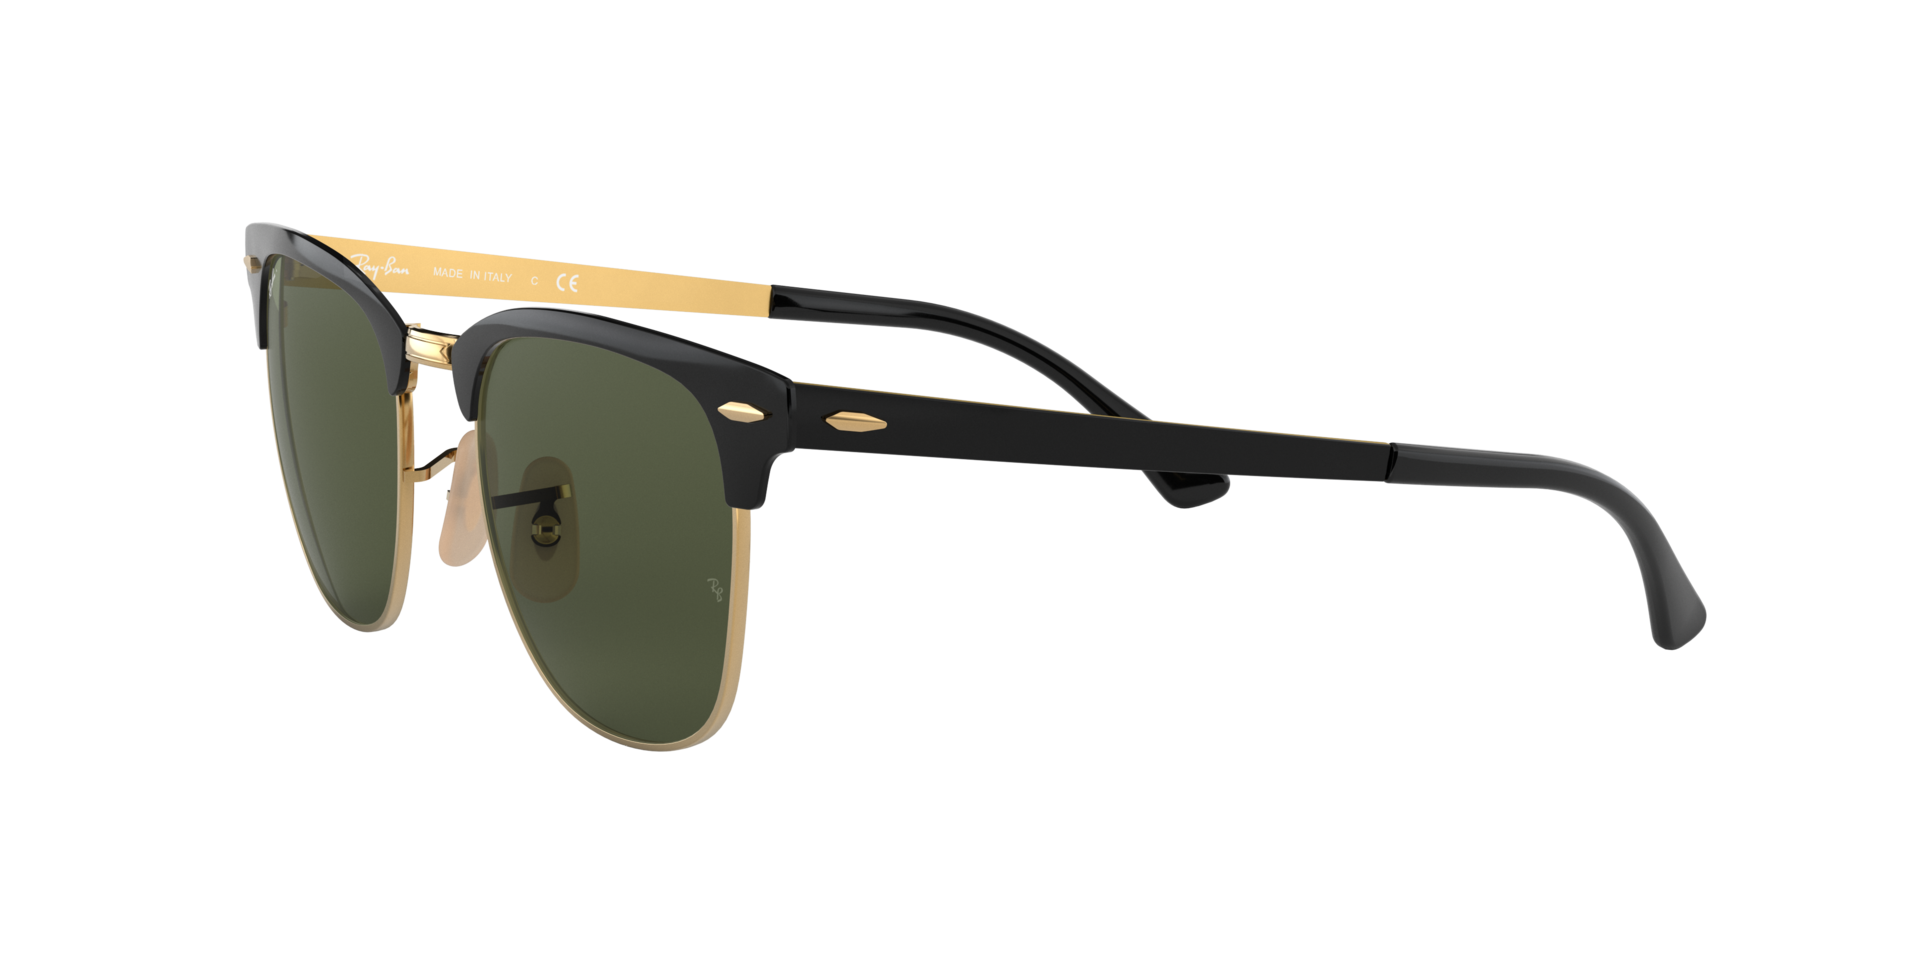 Buy Ray-Ban Clubmaster Metal Sunglasses Online.